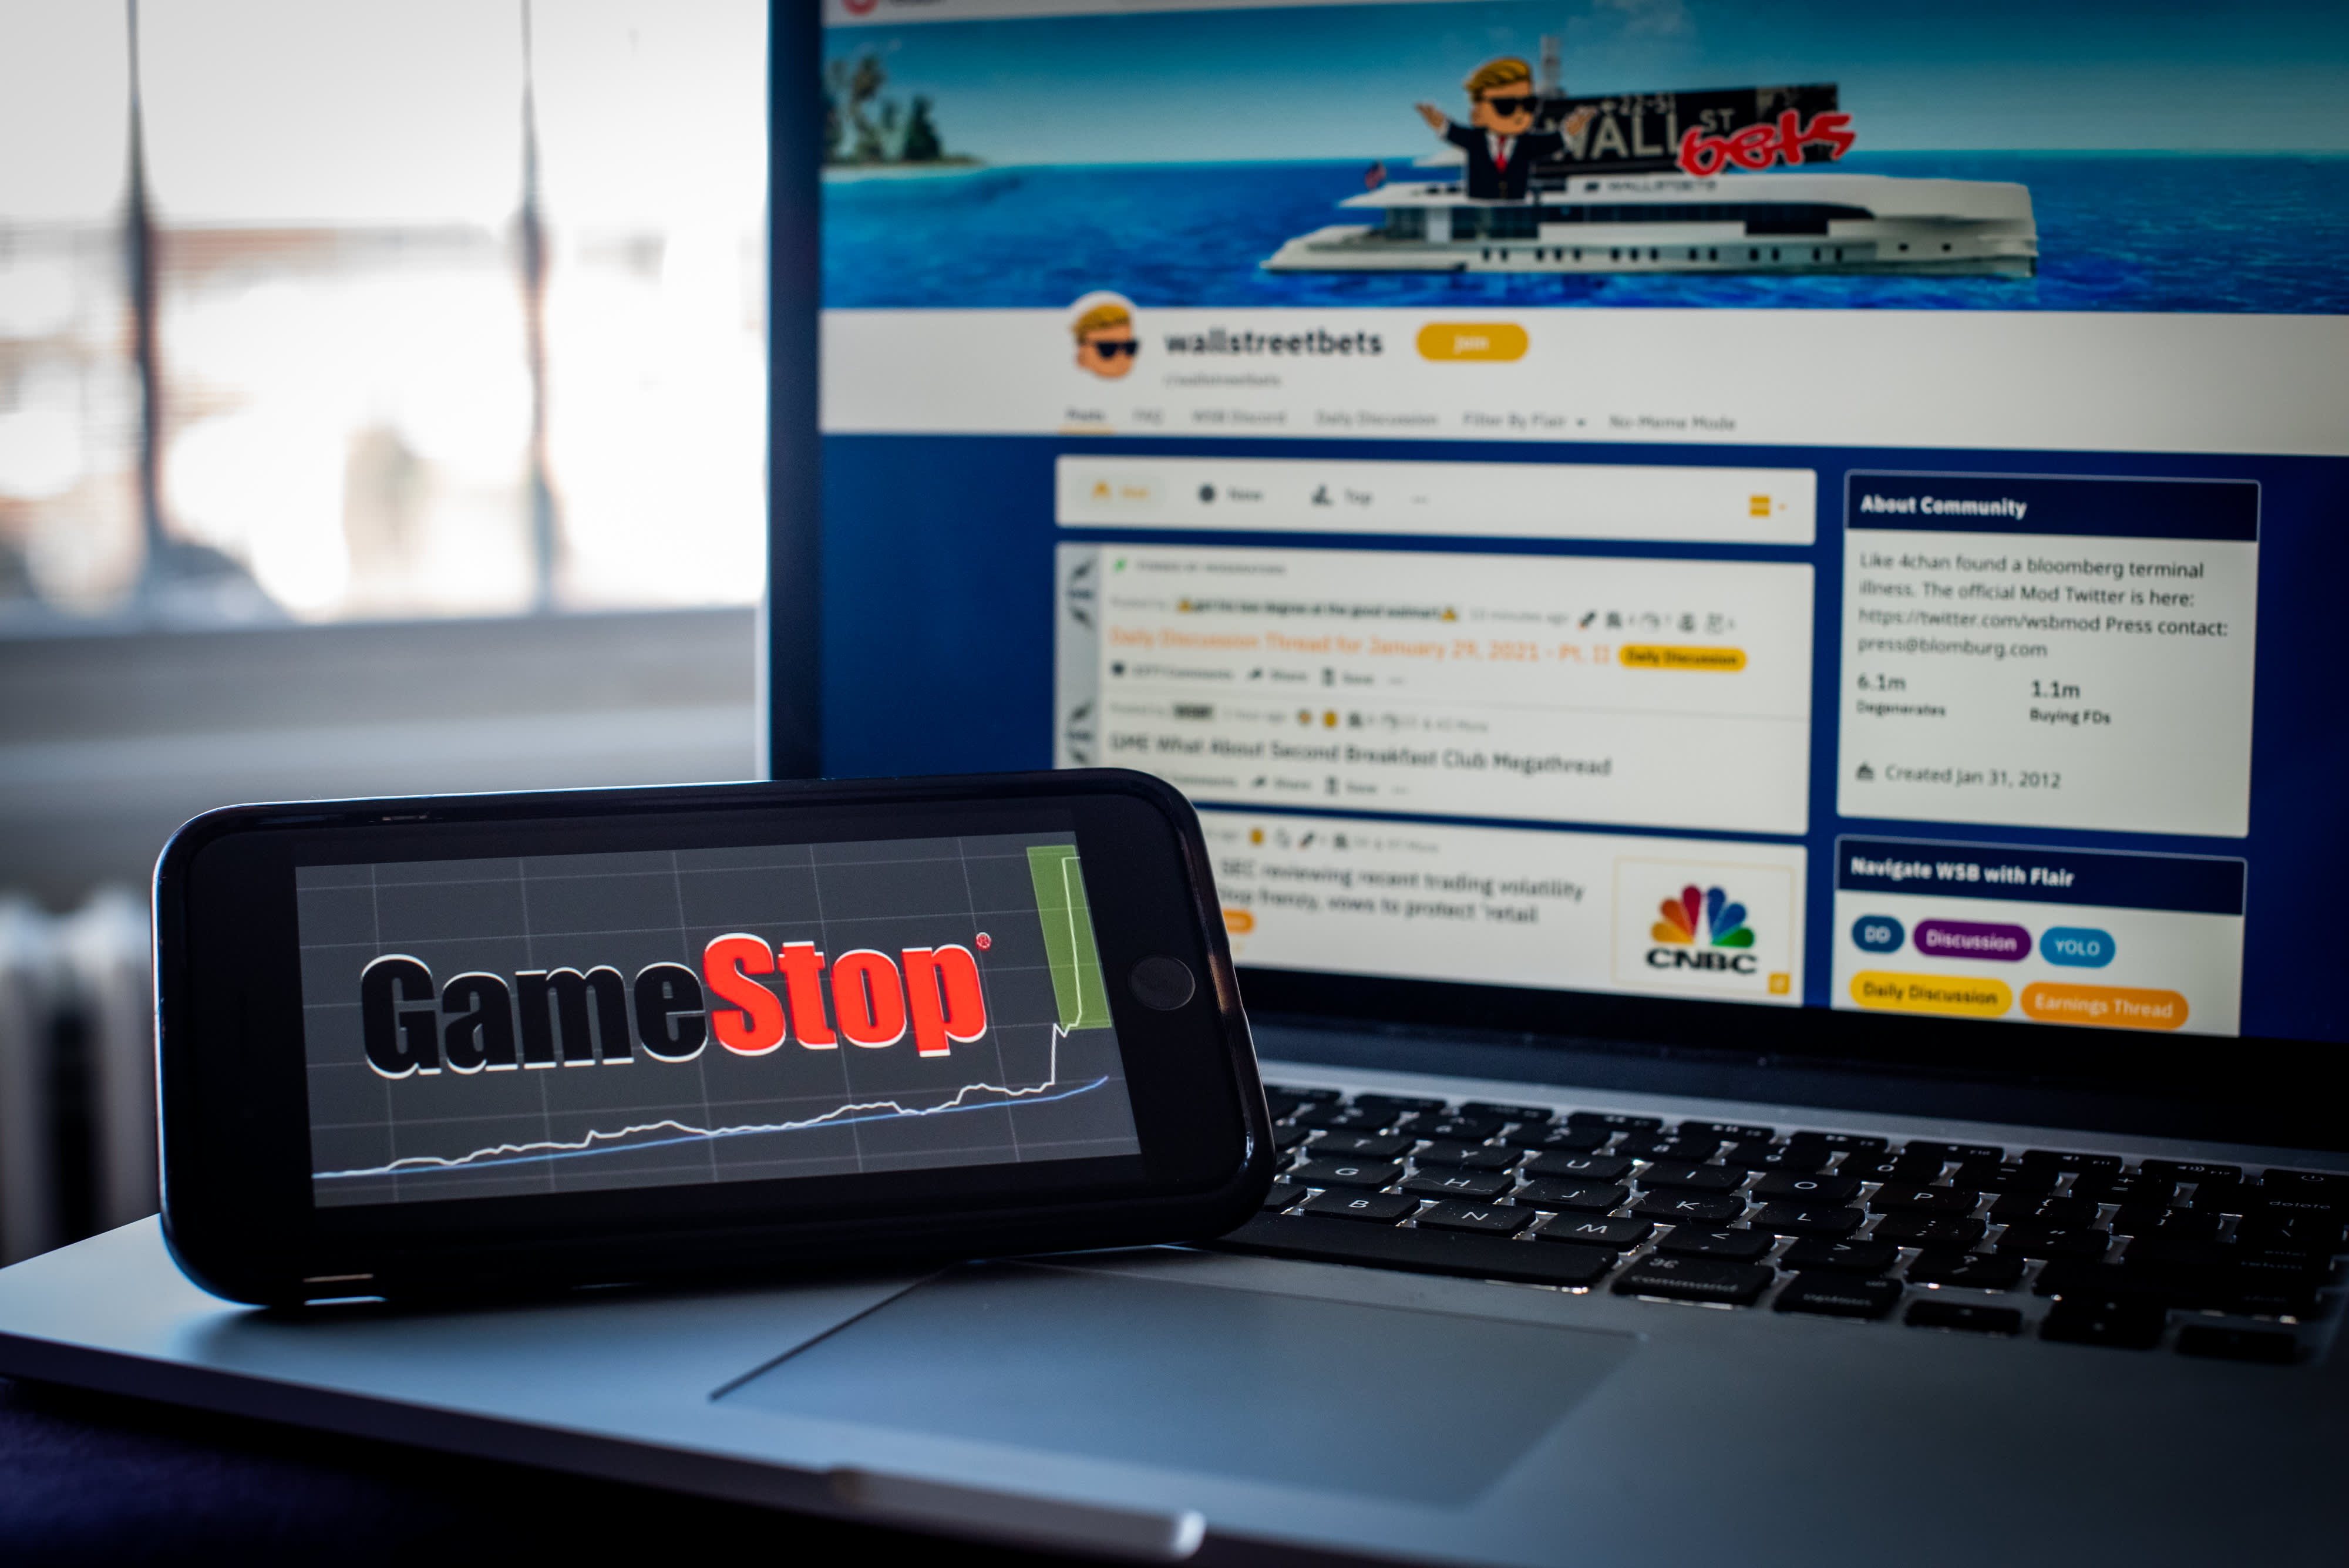 Thomas Peterffy, President of Interactive Brokers, about the GameStop frenzy